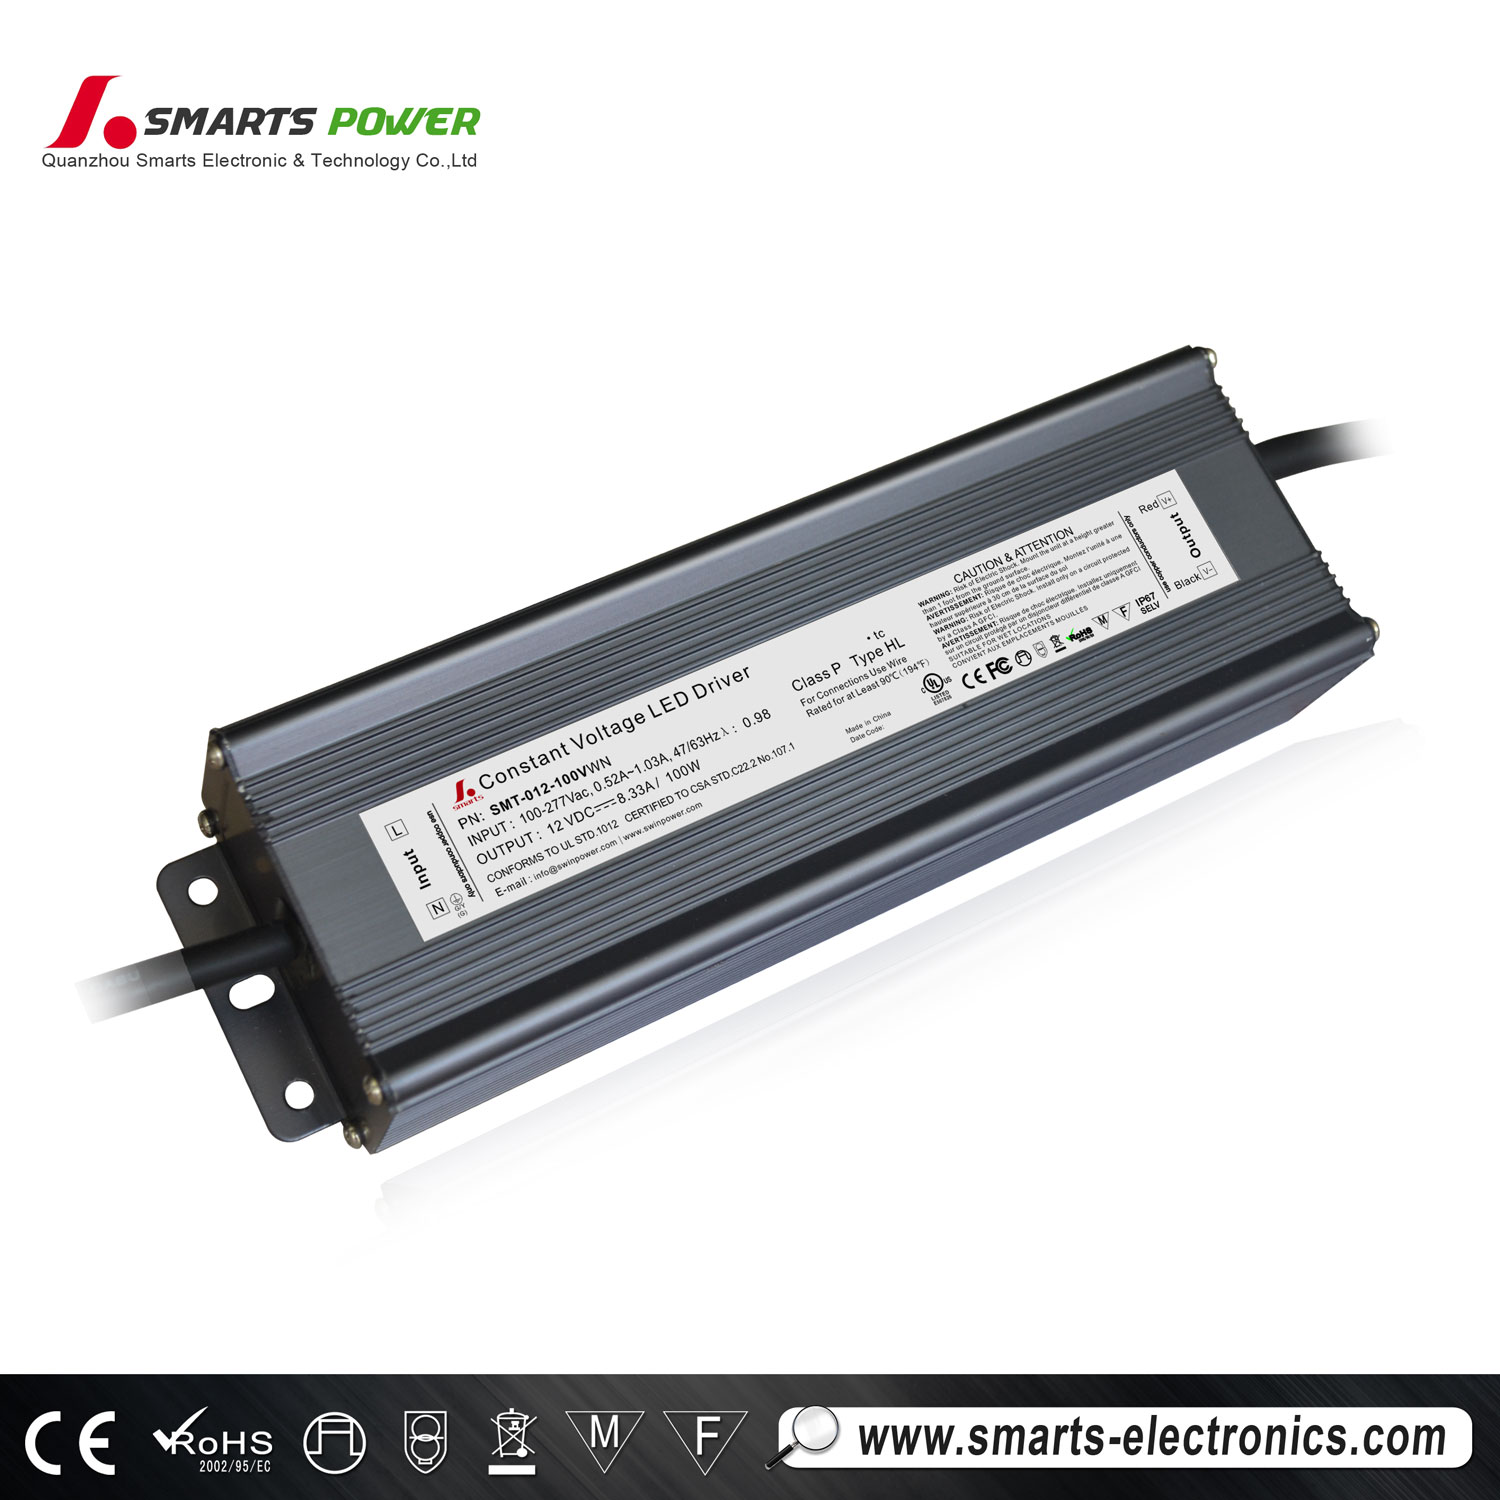 Non-dimmable LED driver 